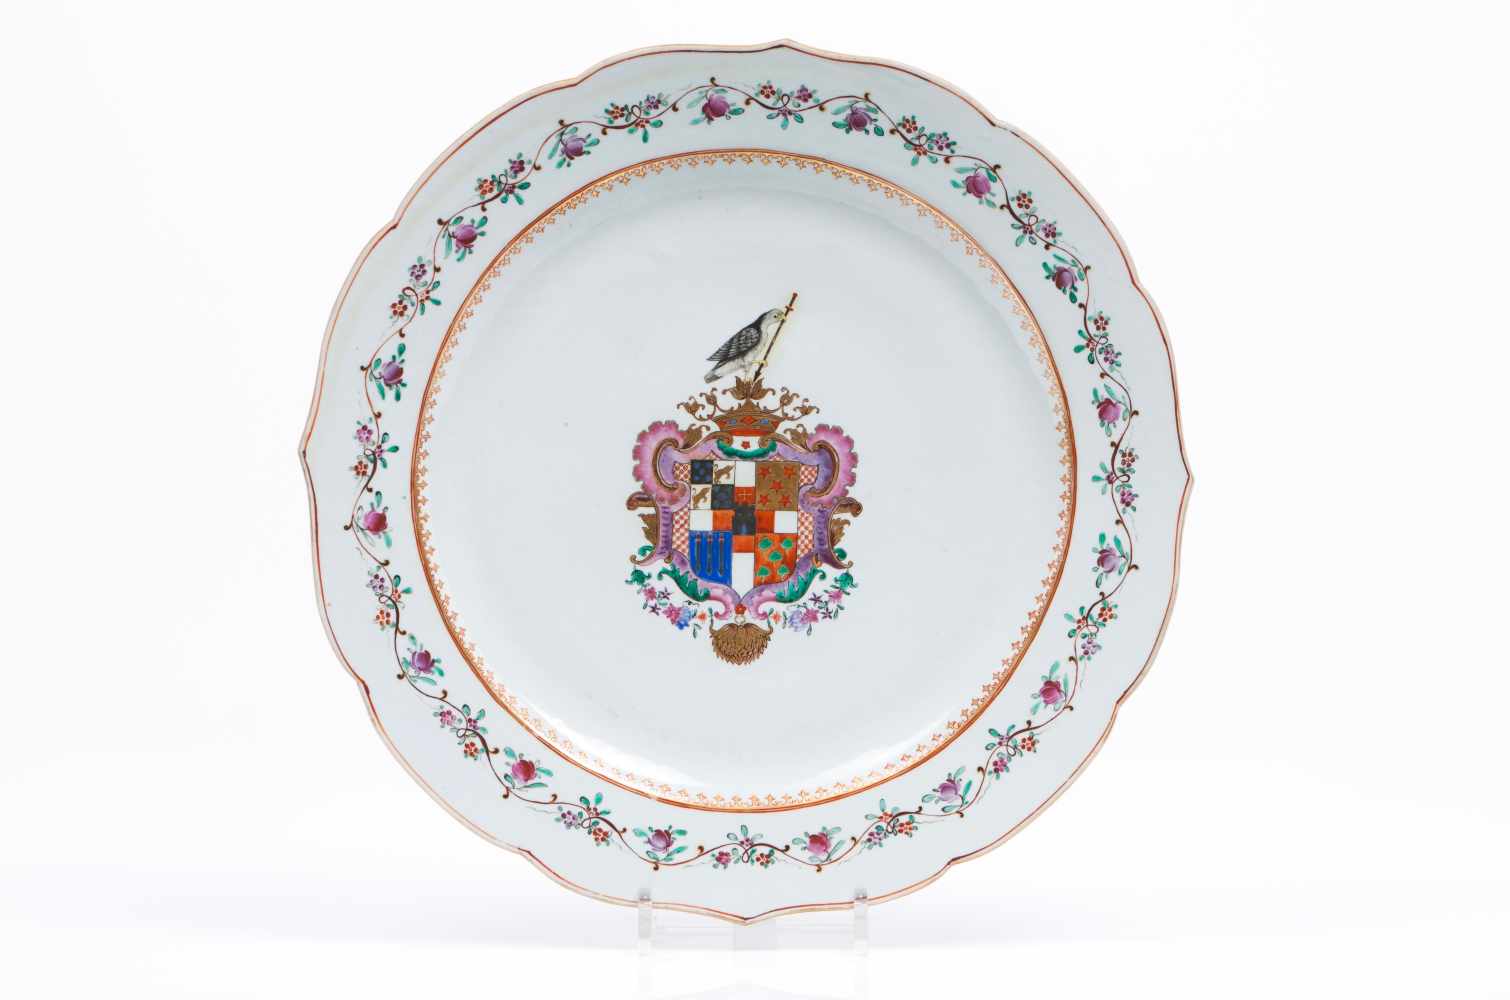 A large scalloped plateChinese export porcelainPolychrome "Famille Rose" enamels and gilt decoration